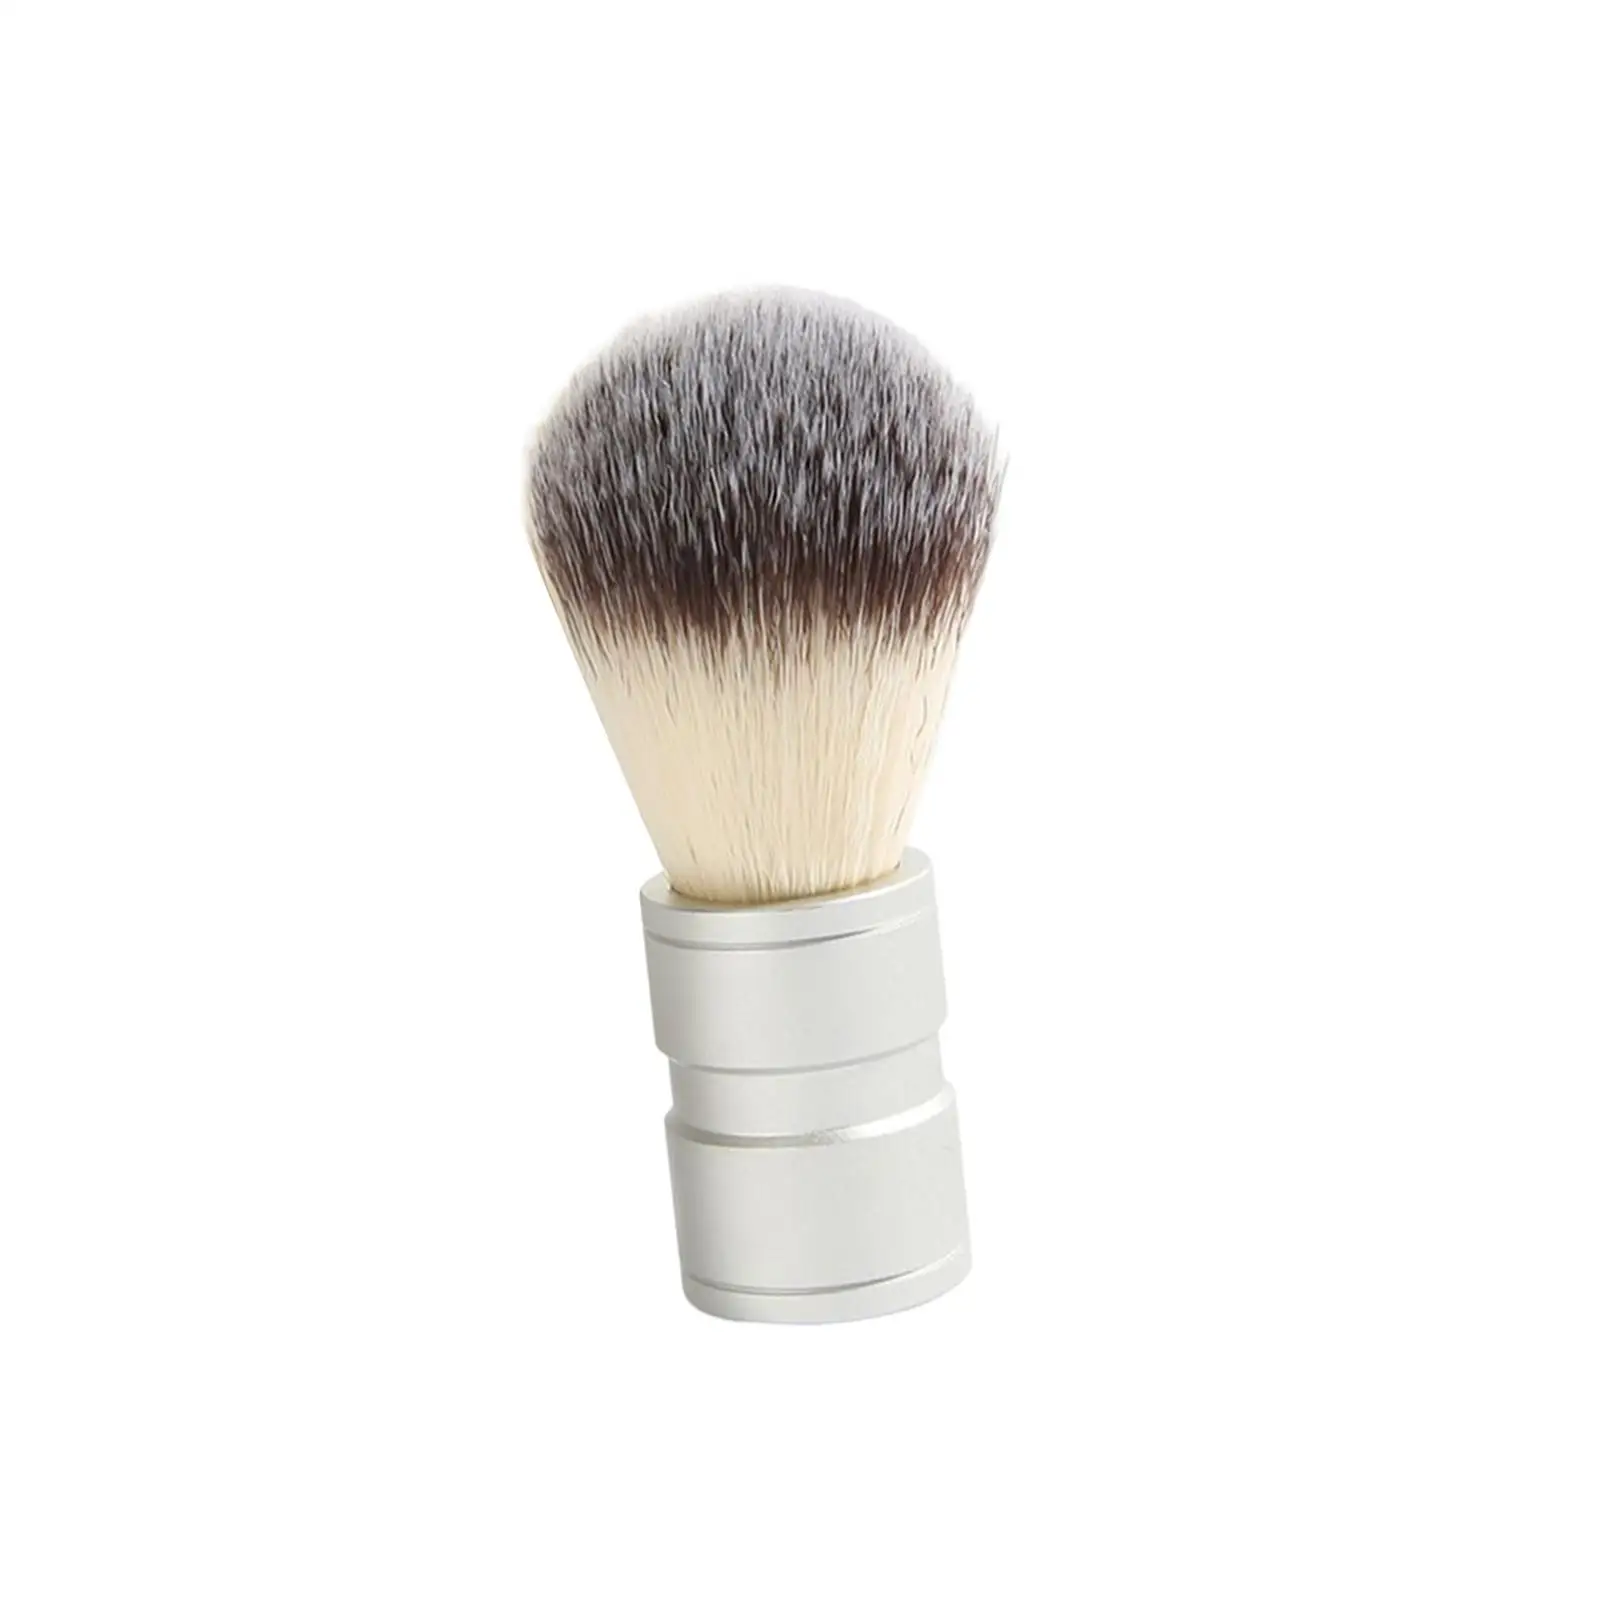 Shaving Brush Portable Tool Lightweight for Barber Home Father Husband Fathers Day Gift